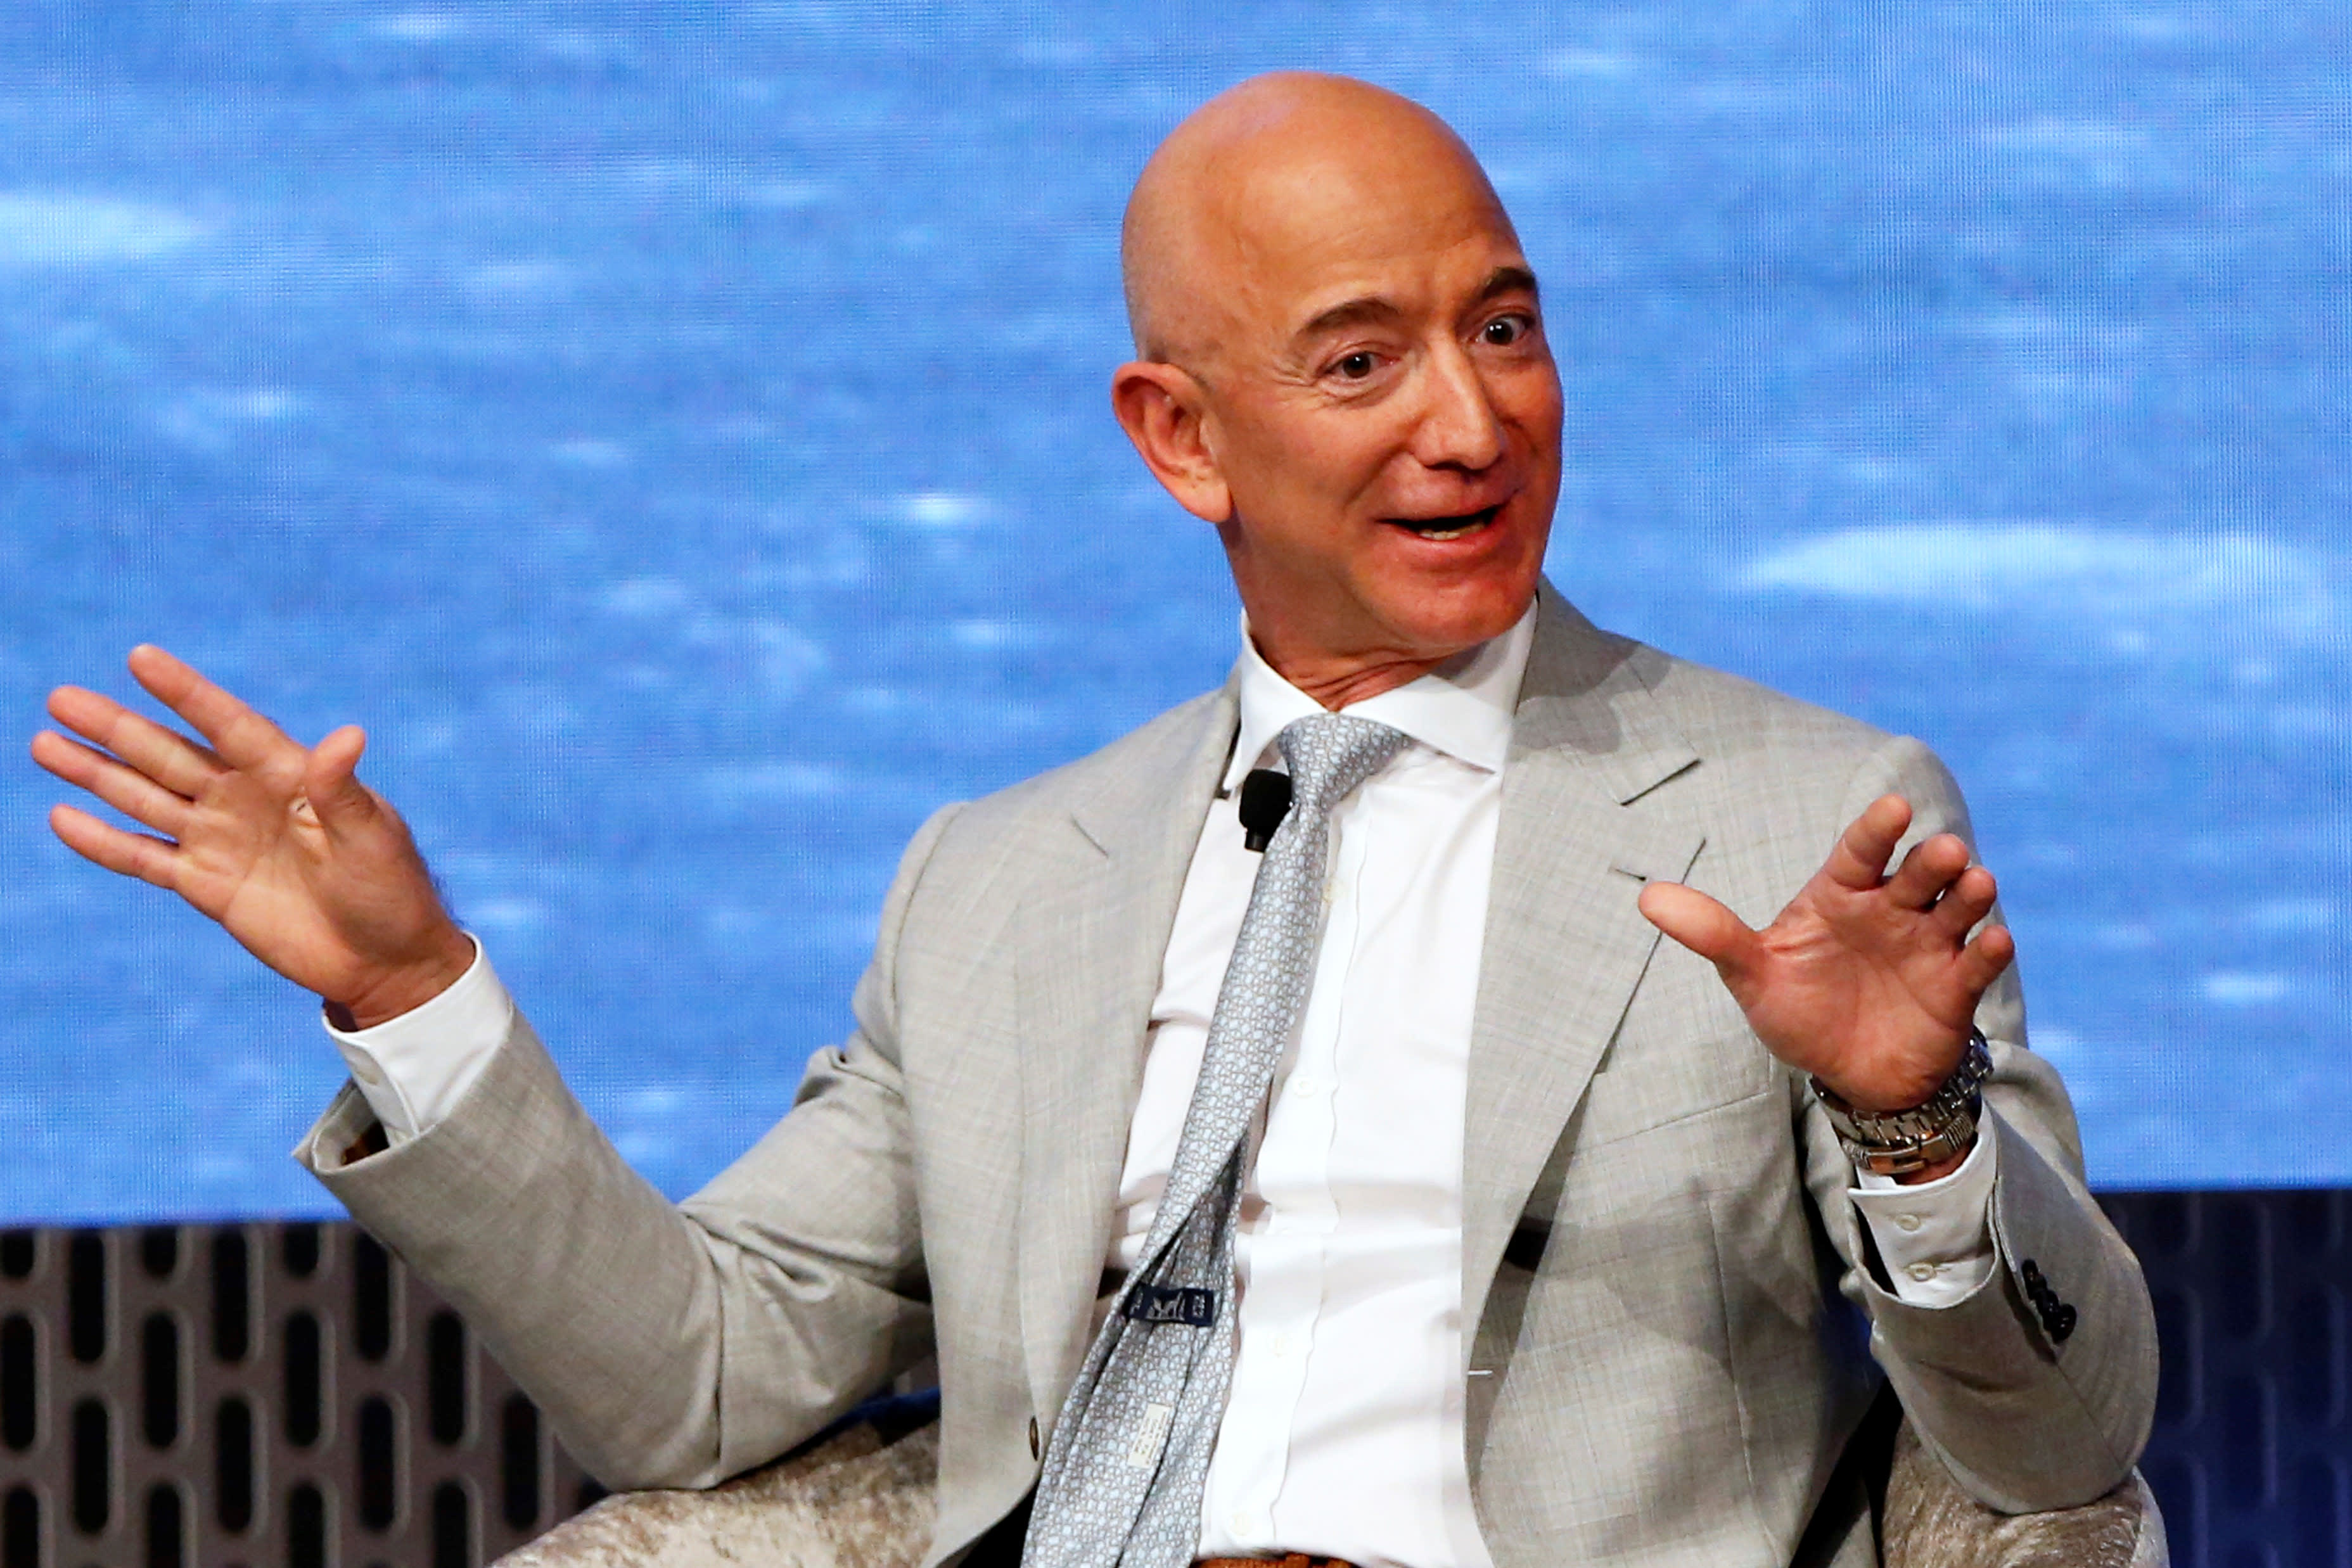 Amazon wants to be exclusive NFL broadcaster in 2023